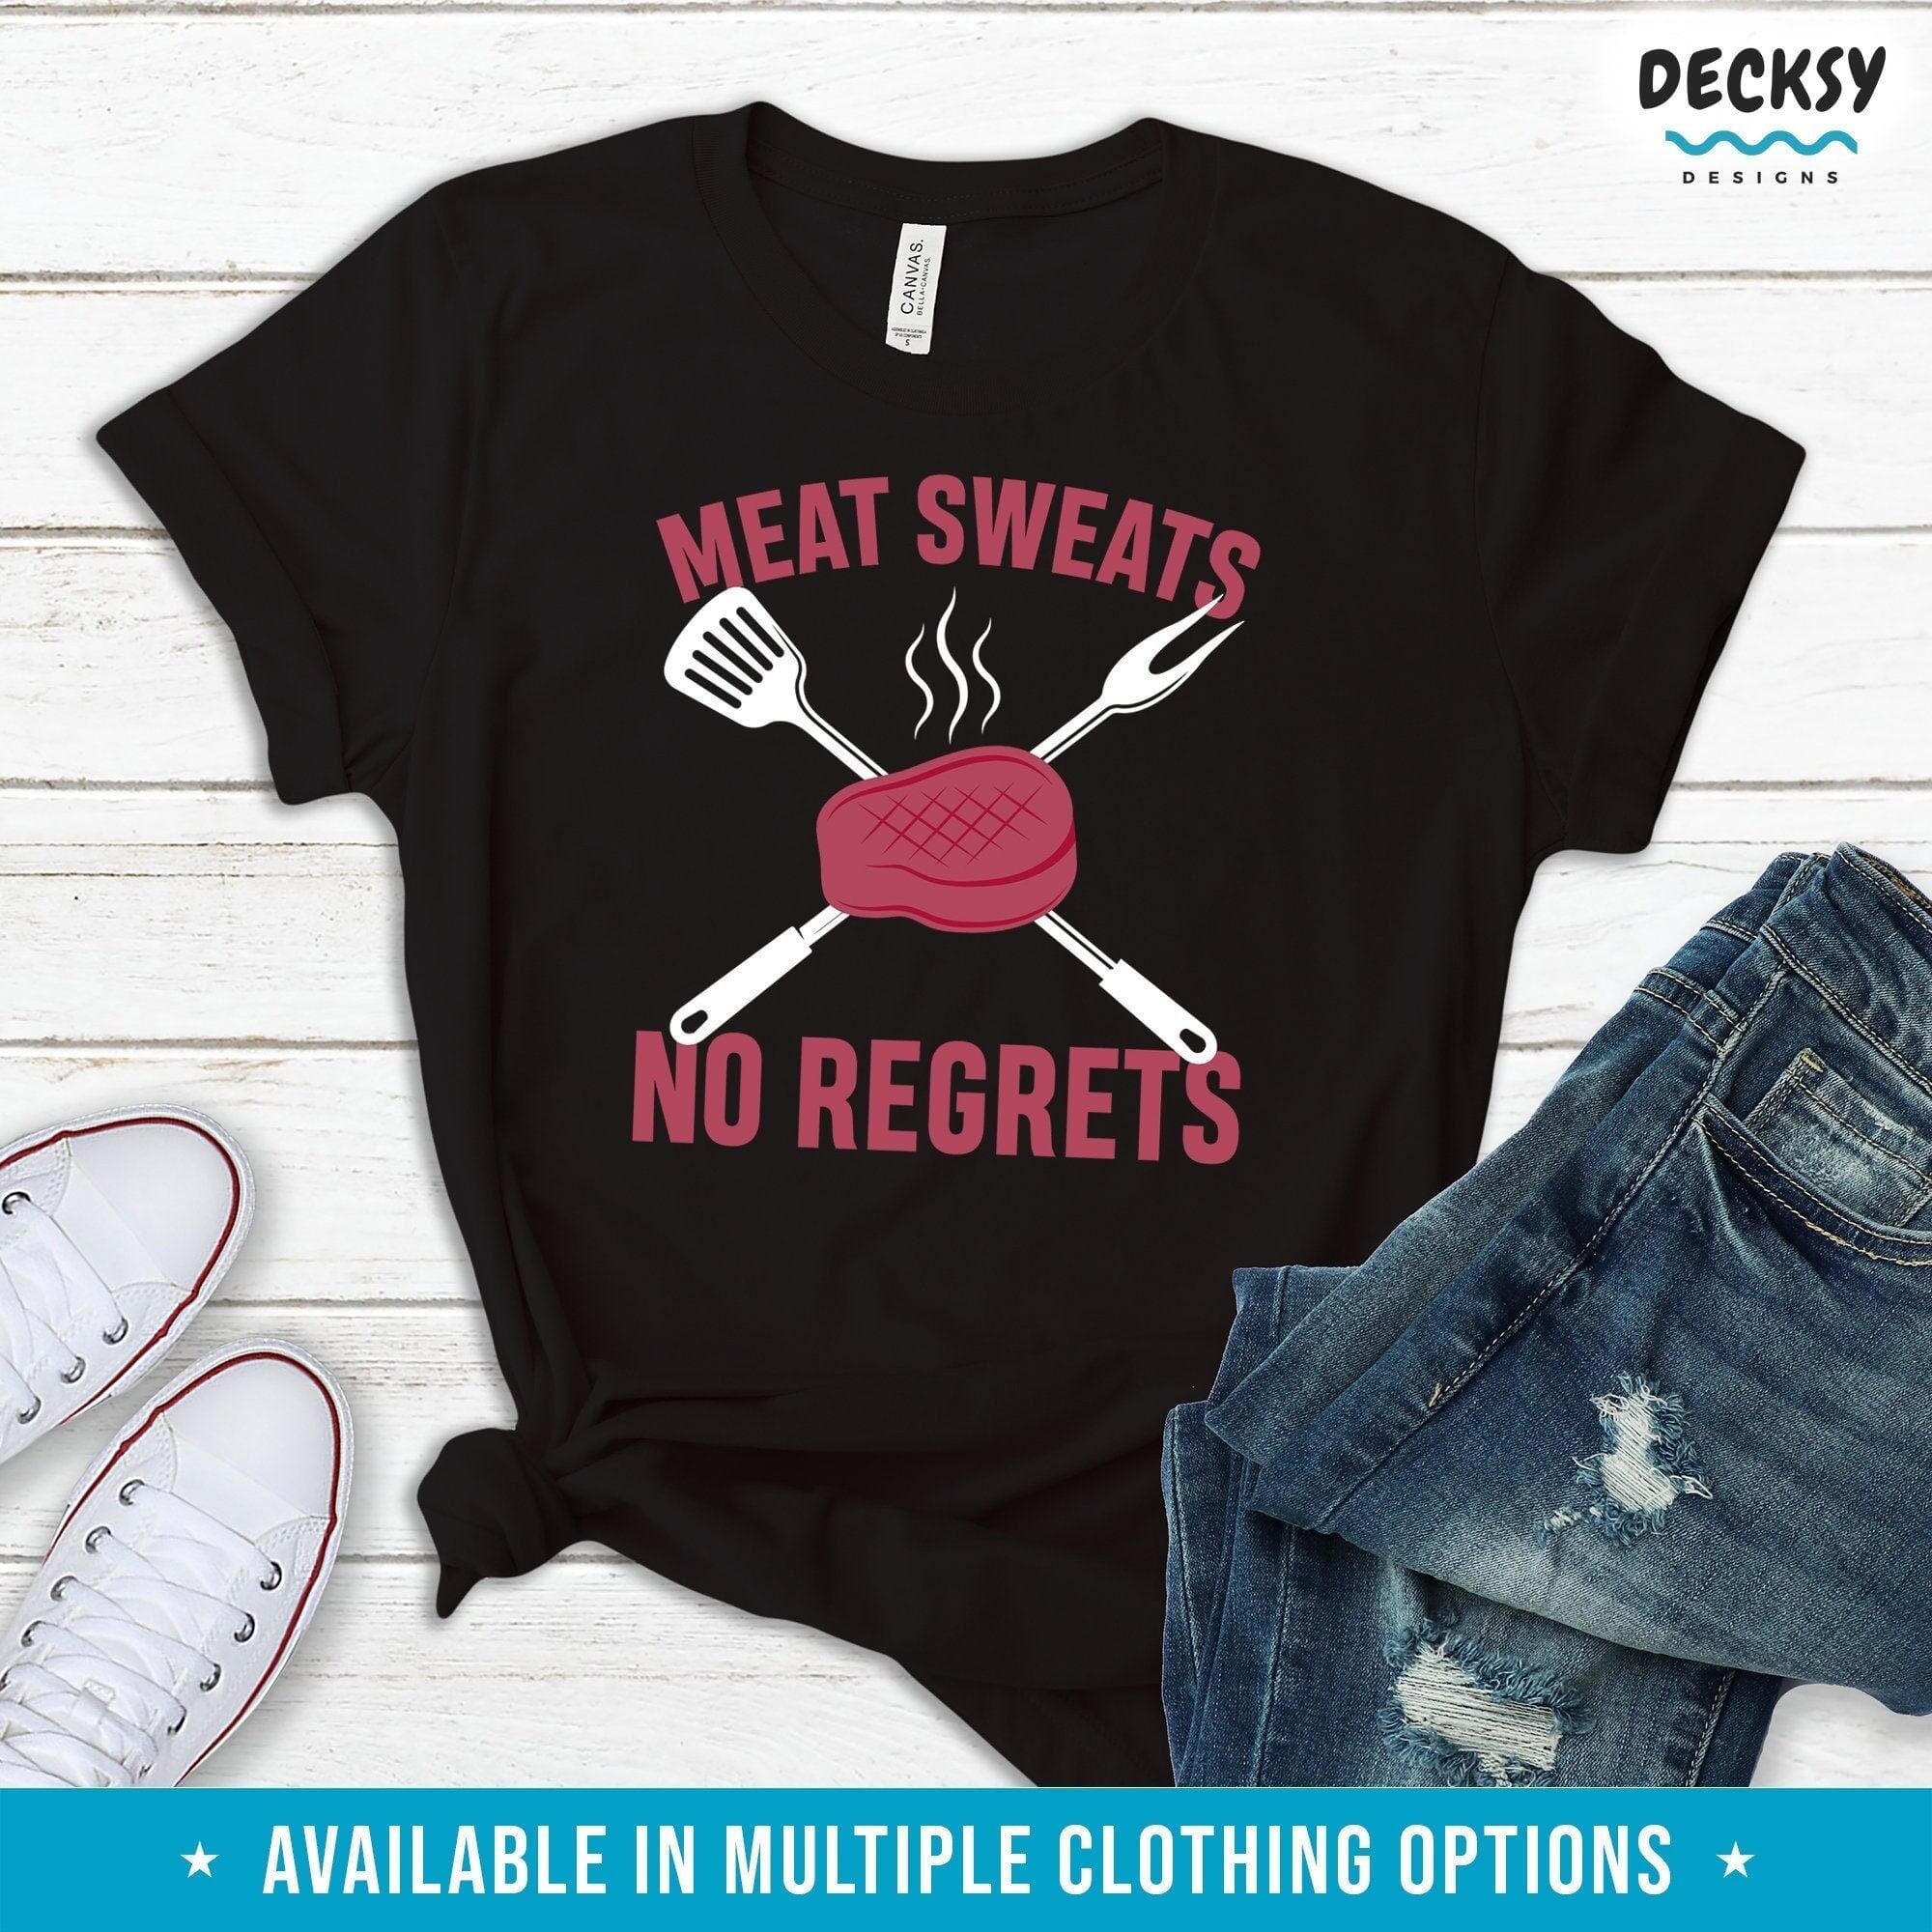 Bbq Smoker Shirt, Funny Barbecue Gift-Clothing:Gender-Neutral Adult Clothing:Tops & Tees:T-shirts:Graphic Tees-DecksyDesigns